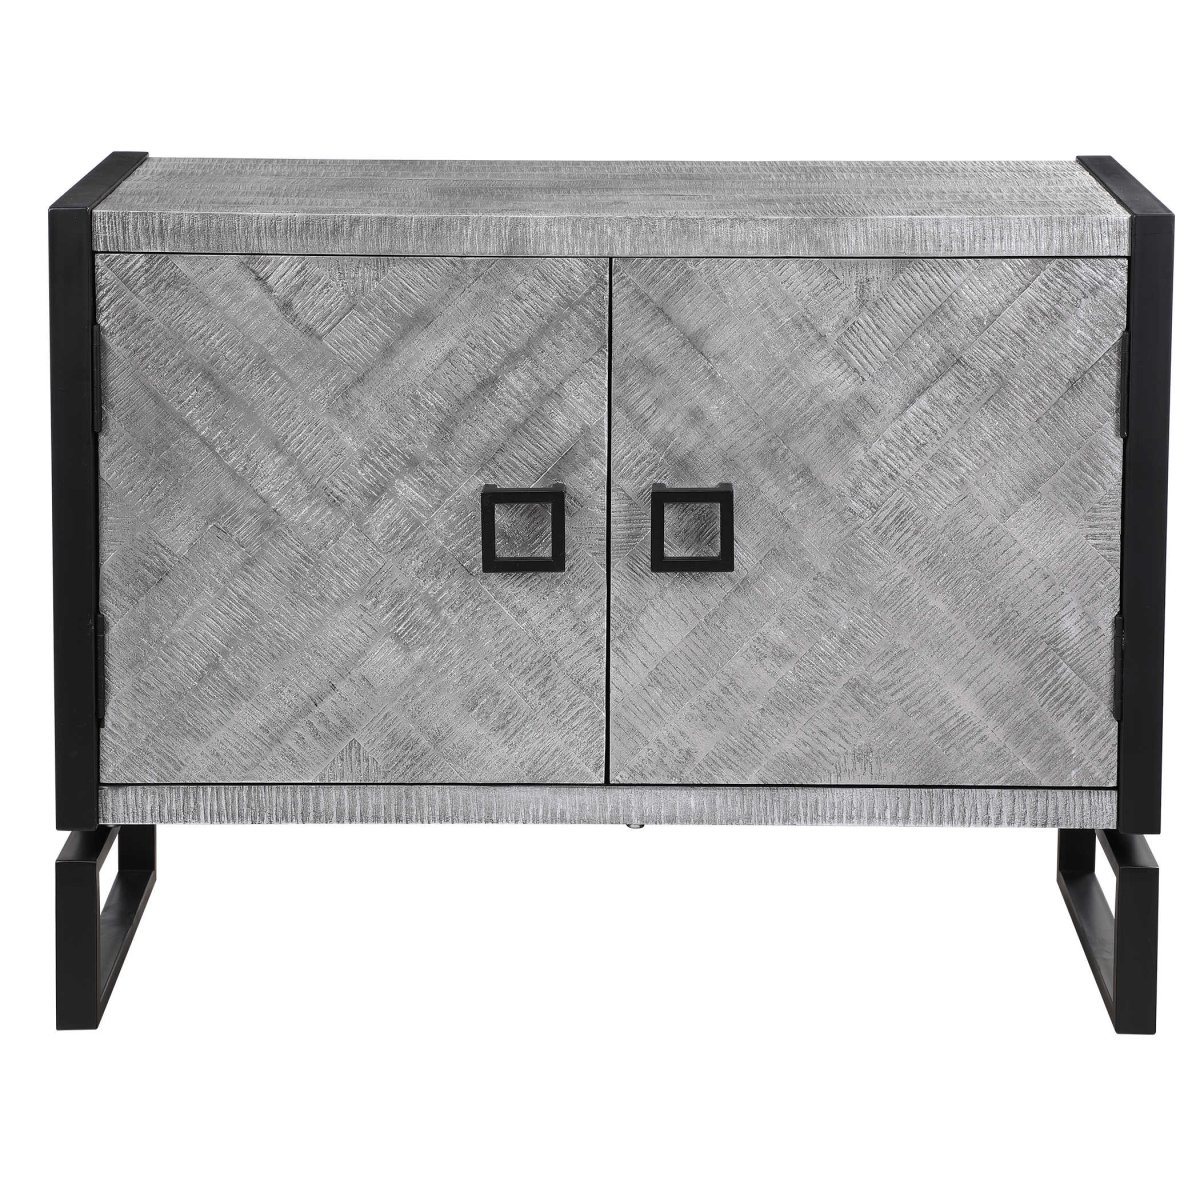 Picture of 212 Main 24990 Keyes 2 Door Cabinet  Light Gray &amp; Charcoal - 40 L x 48 W x 41 T in.